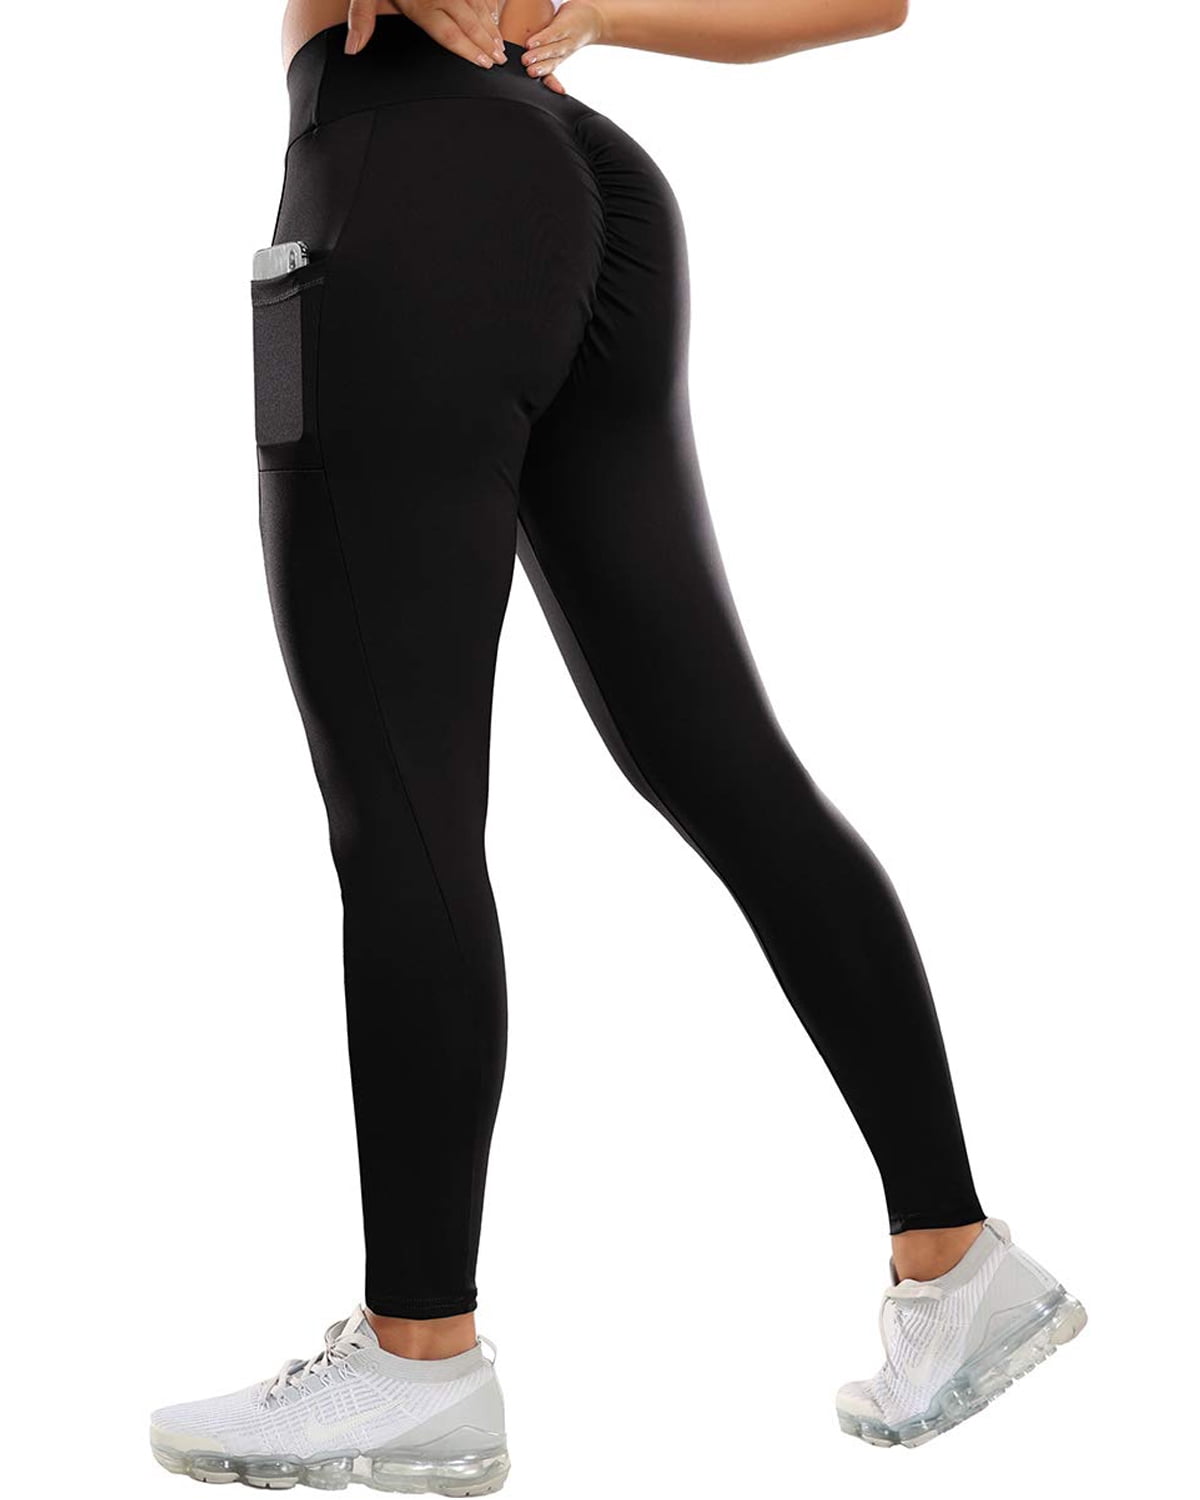 Ruched Booty Leggings for Women with Pockets Scrunch Butt Lifting Yoga ...